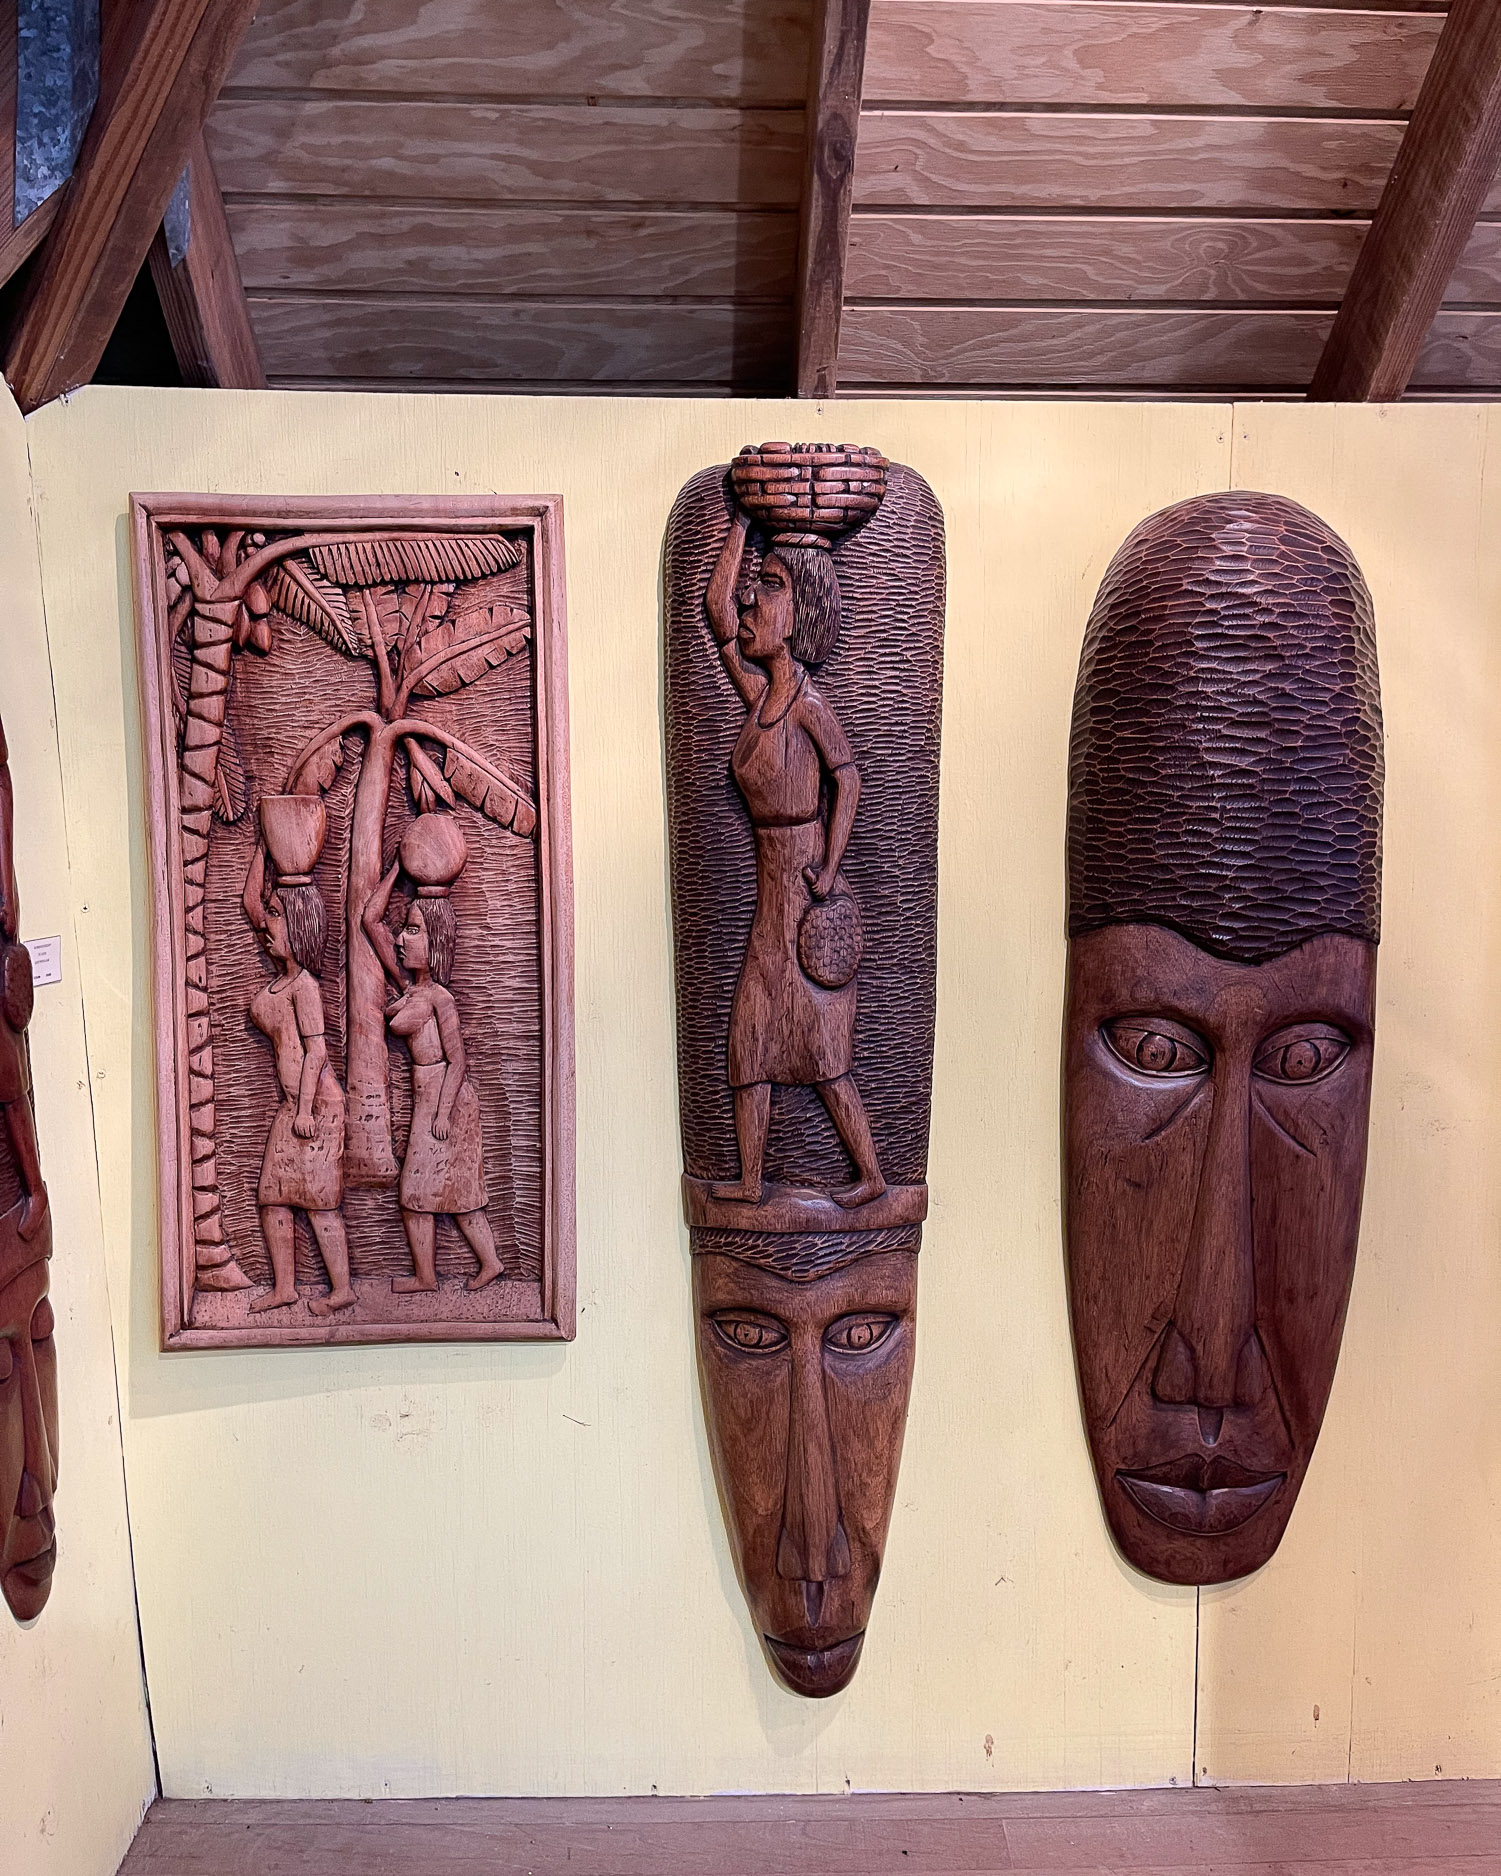 Lawrence Deligny wood carving at Anse Chastenet Saint Lucia Photo Heatheronhertravels.com